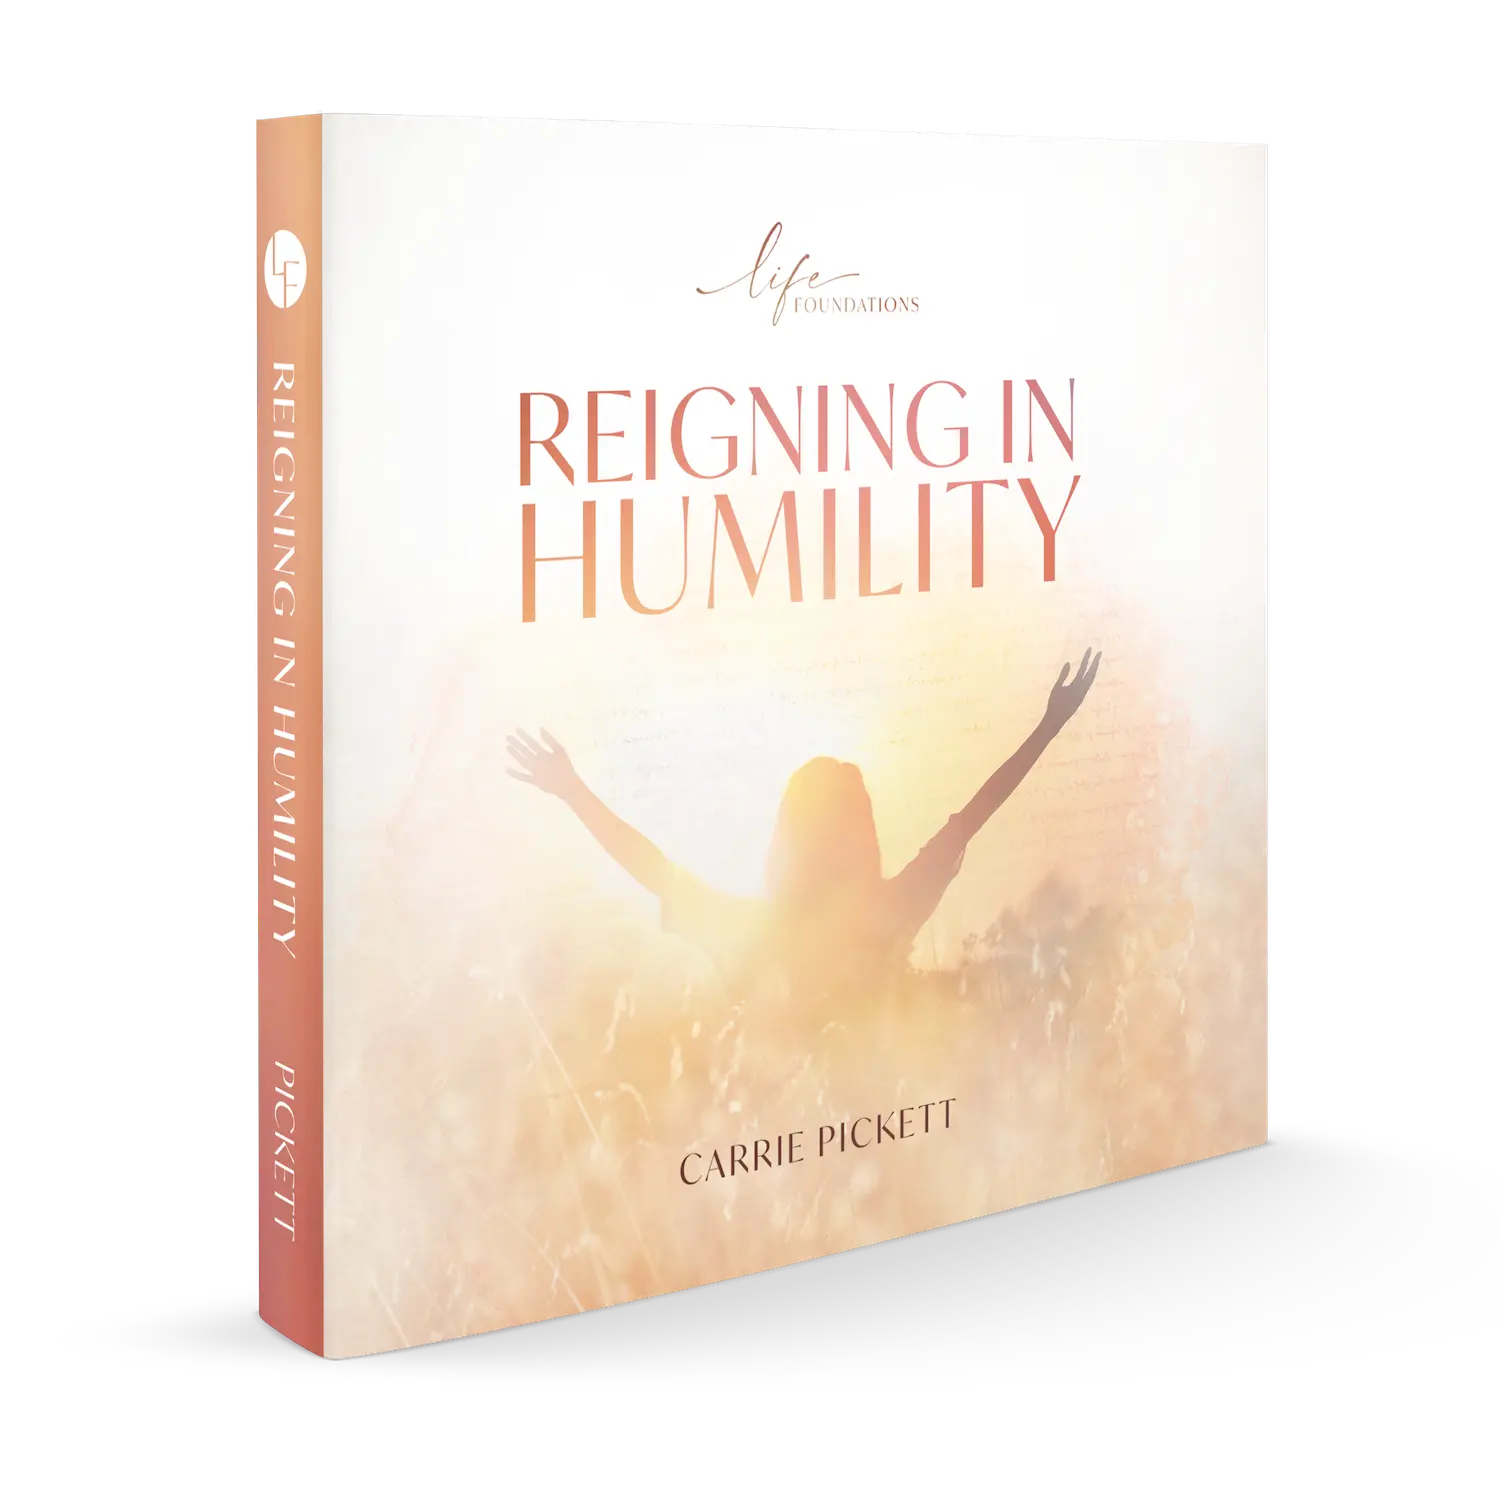 Reigning in Humility CD Album